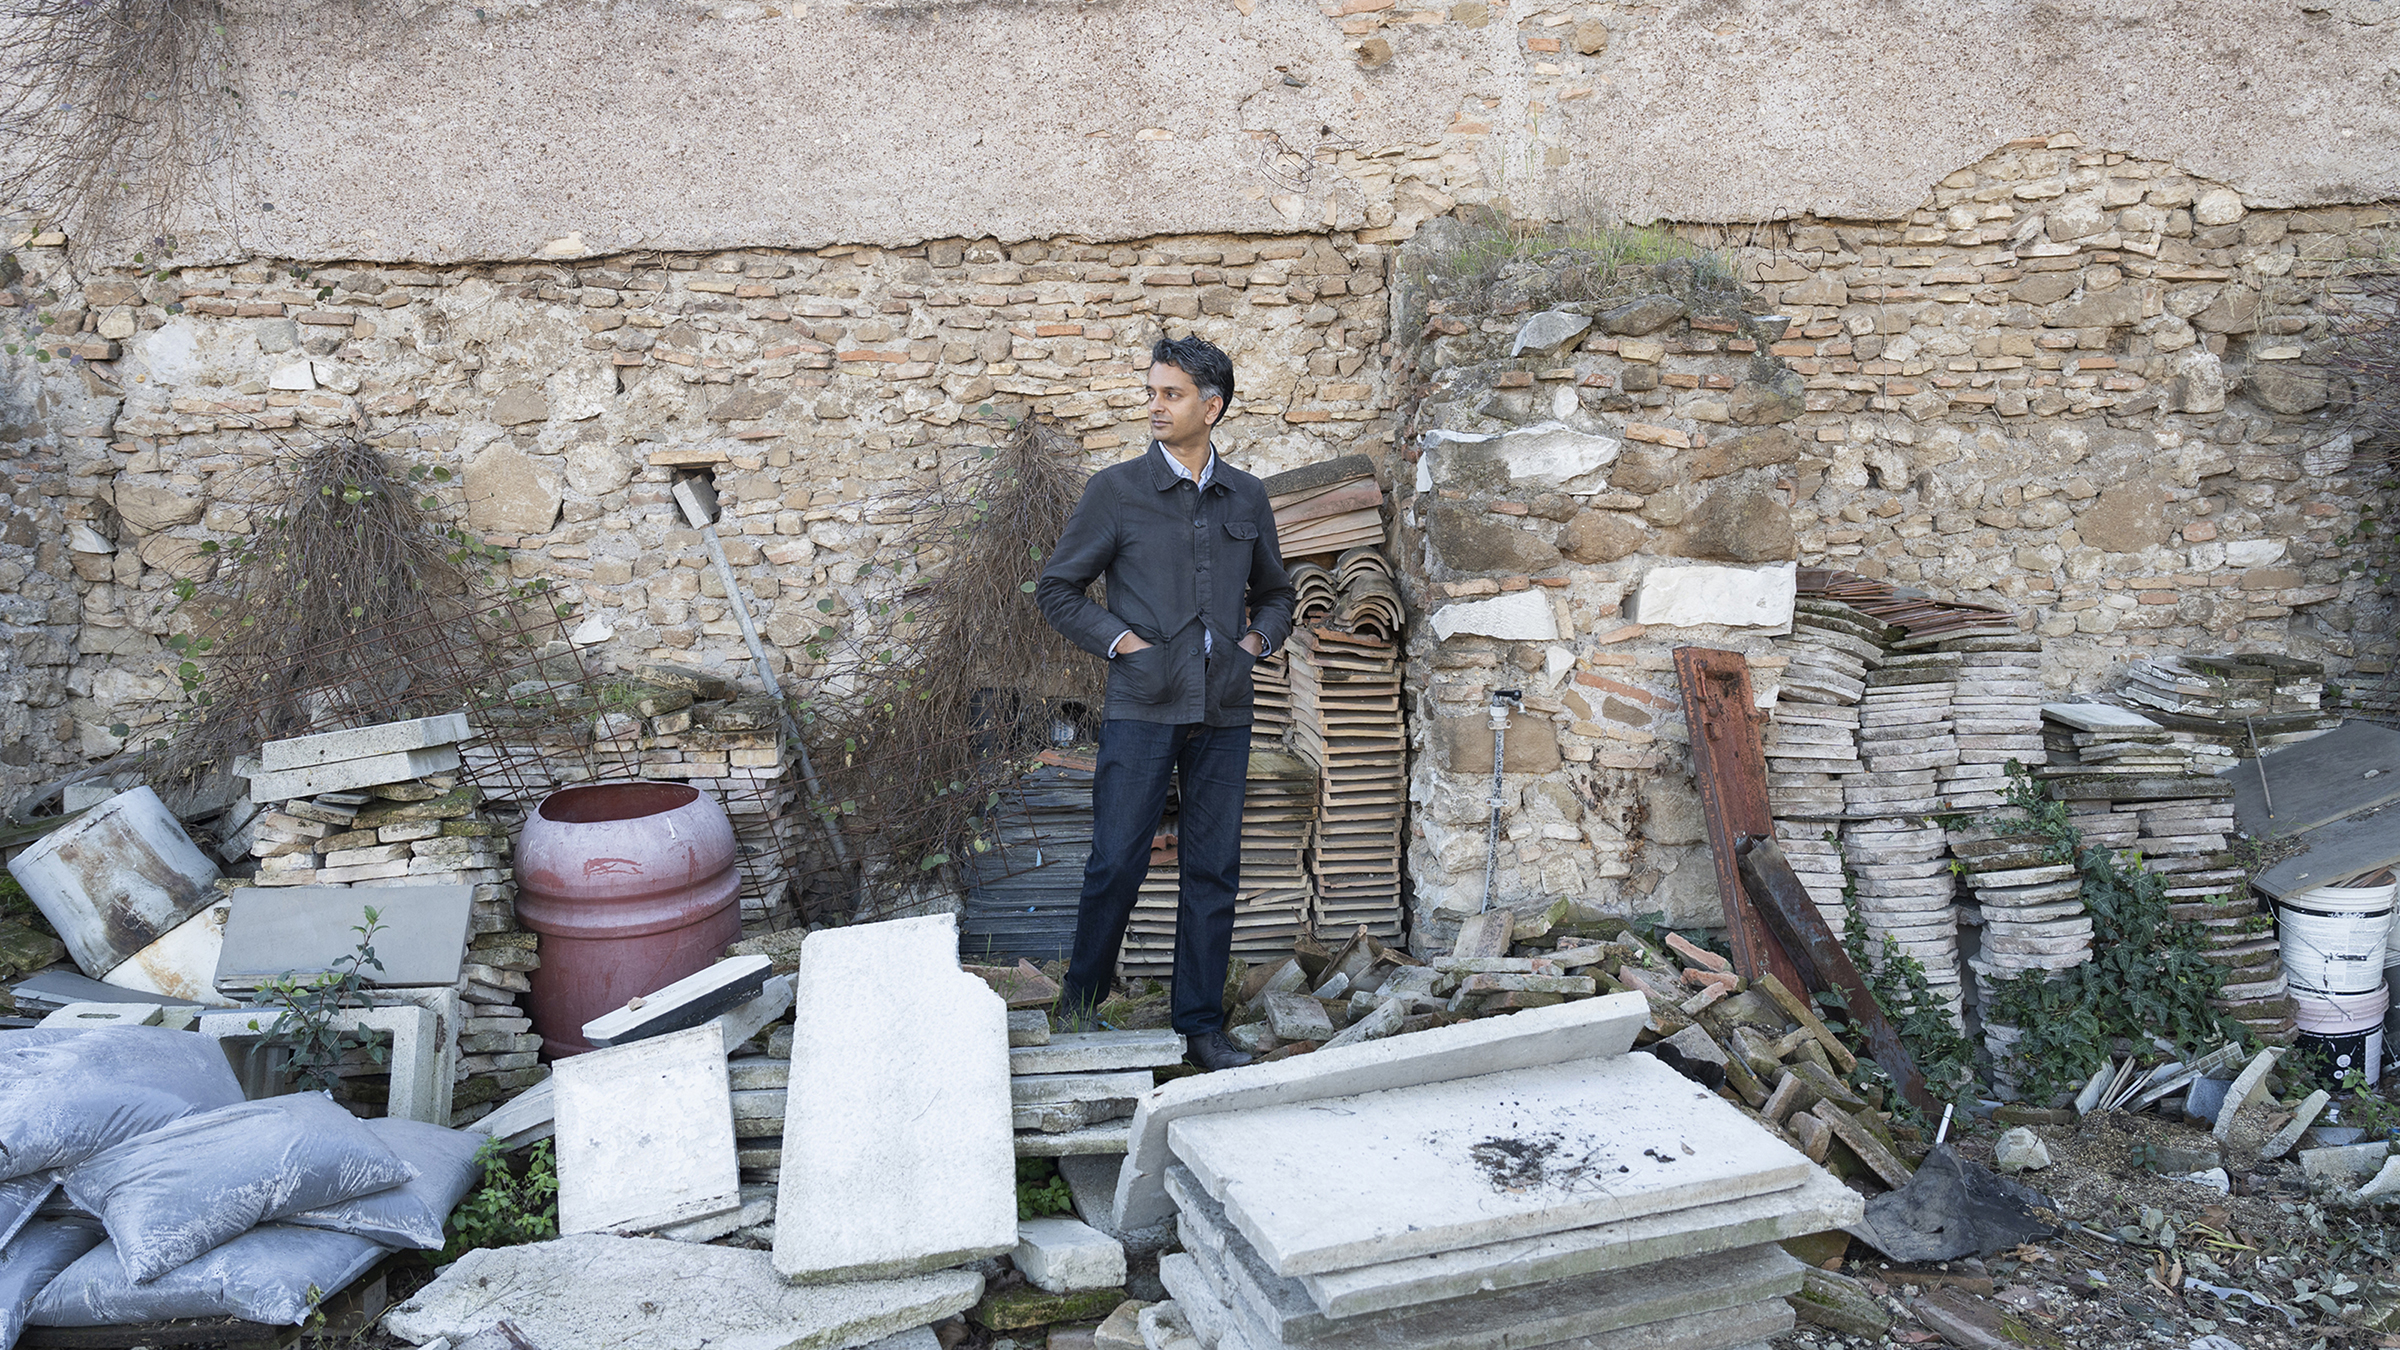 Color photo of a brown skinned man wearing a dark jacket and pants; he stands among strewn building construction material in concrete, terracotta, plastic, and sandbags